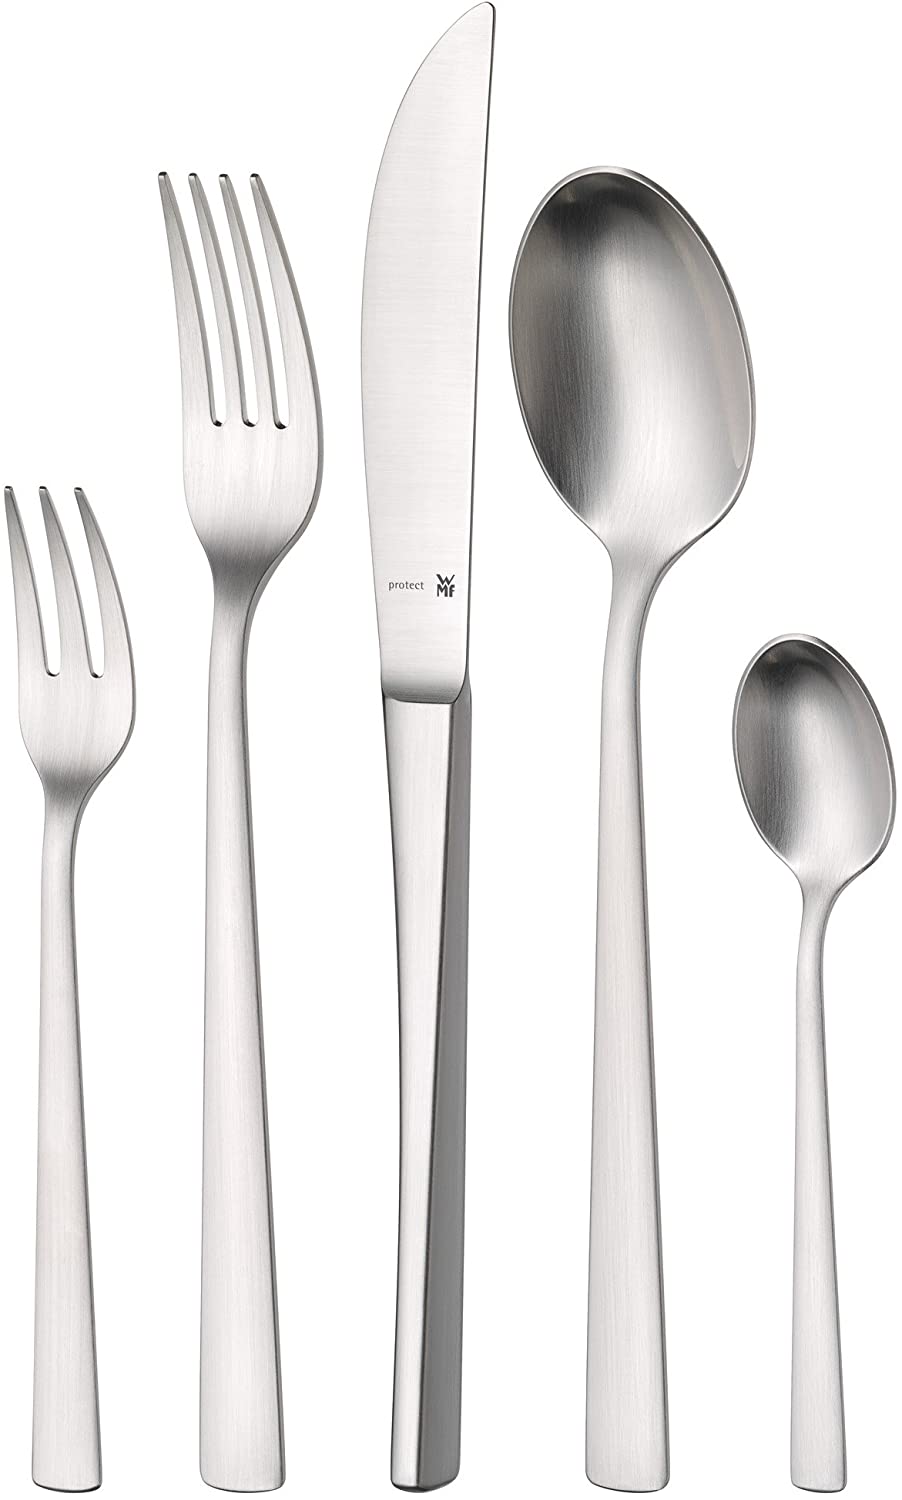 WMF Corvo cutlery set, 66-teilig, with serving utensils for 12 people, used a knife blade, Cromargan protect stainless steel satin-finish, extremely scratch-resistant, dishwasher safe